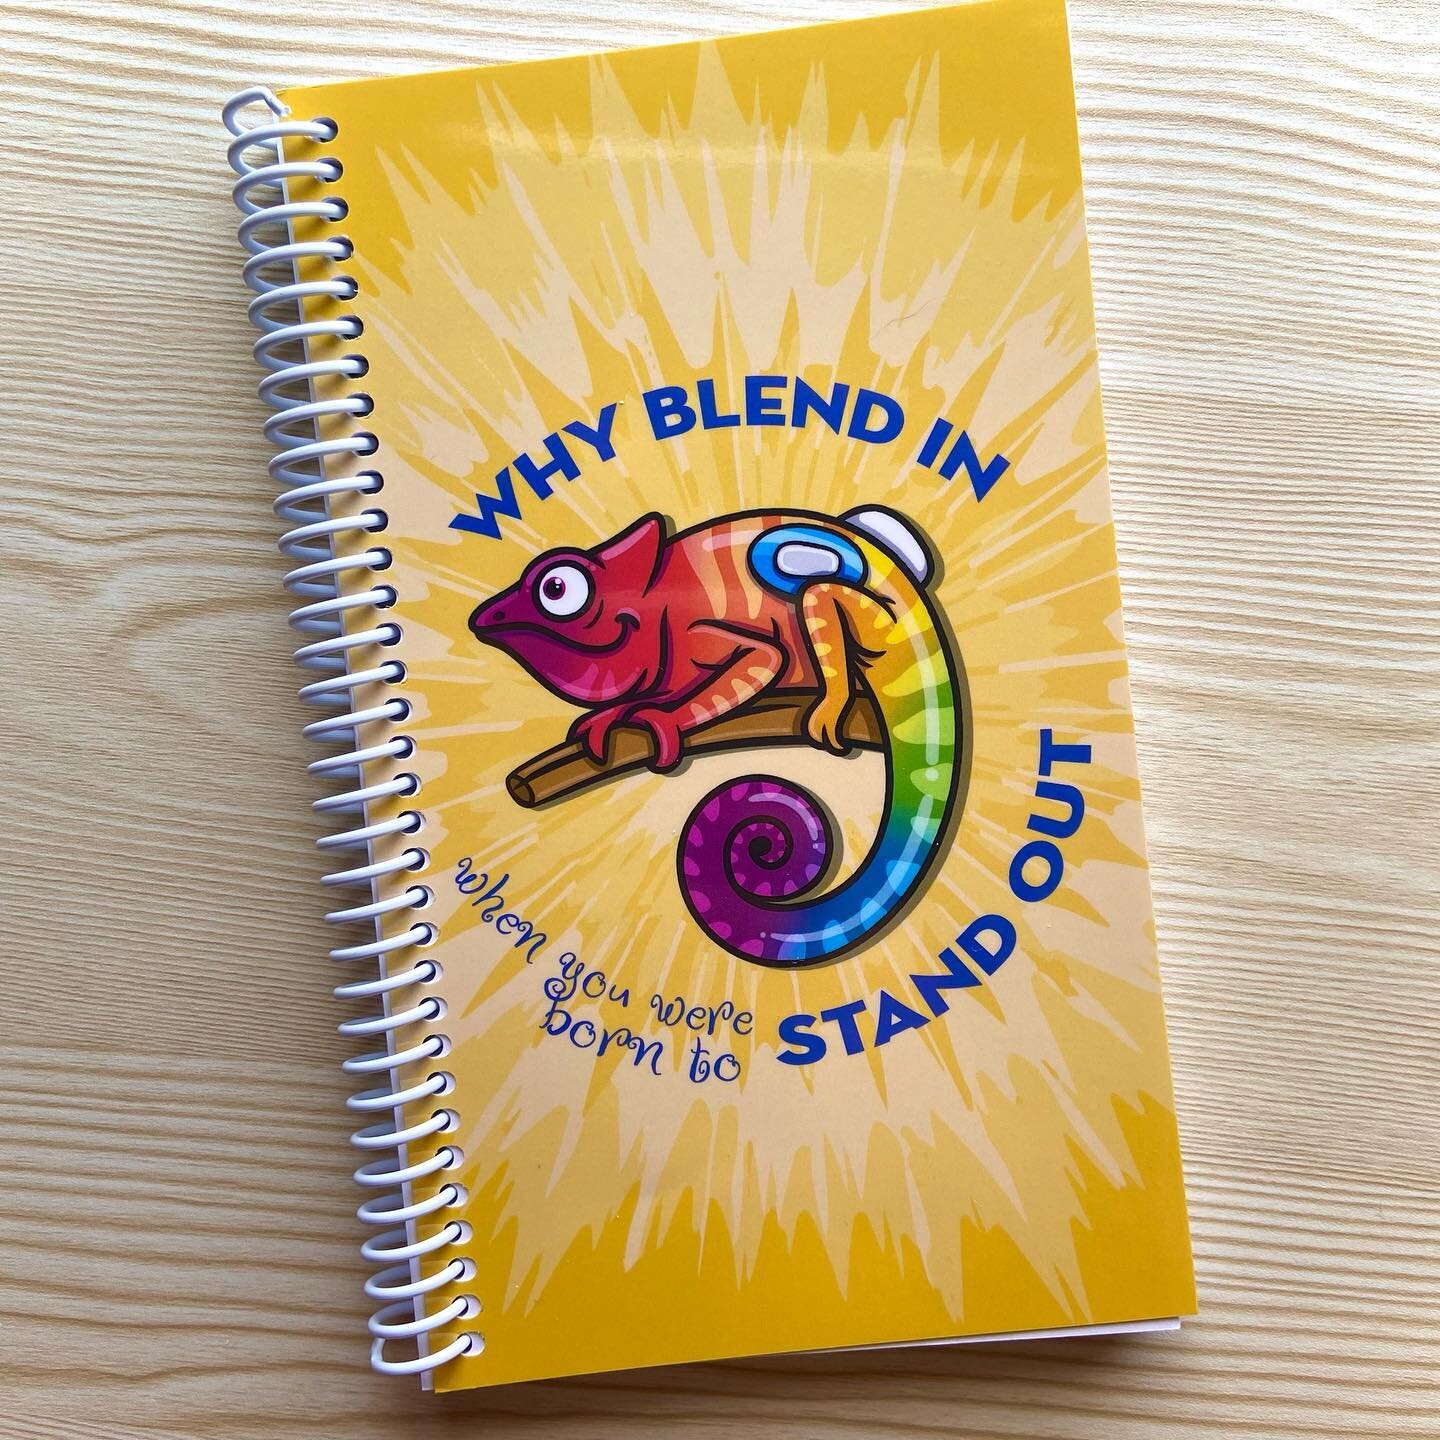 A new cover design is now available for our Meal/Blood Sugar Logbook! (Shop at mytypeone.etsy.com)
&bull;
Product details:
- This journal is made to help you stay organized and on top of your diabetes management! With this journal, you can keep track